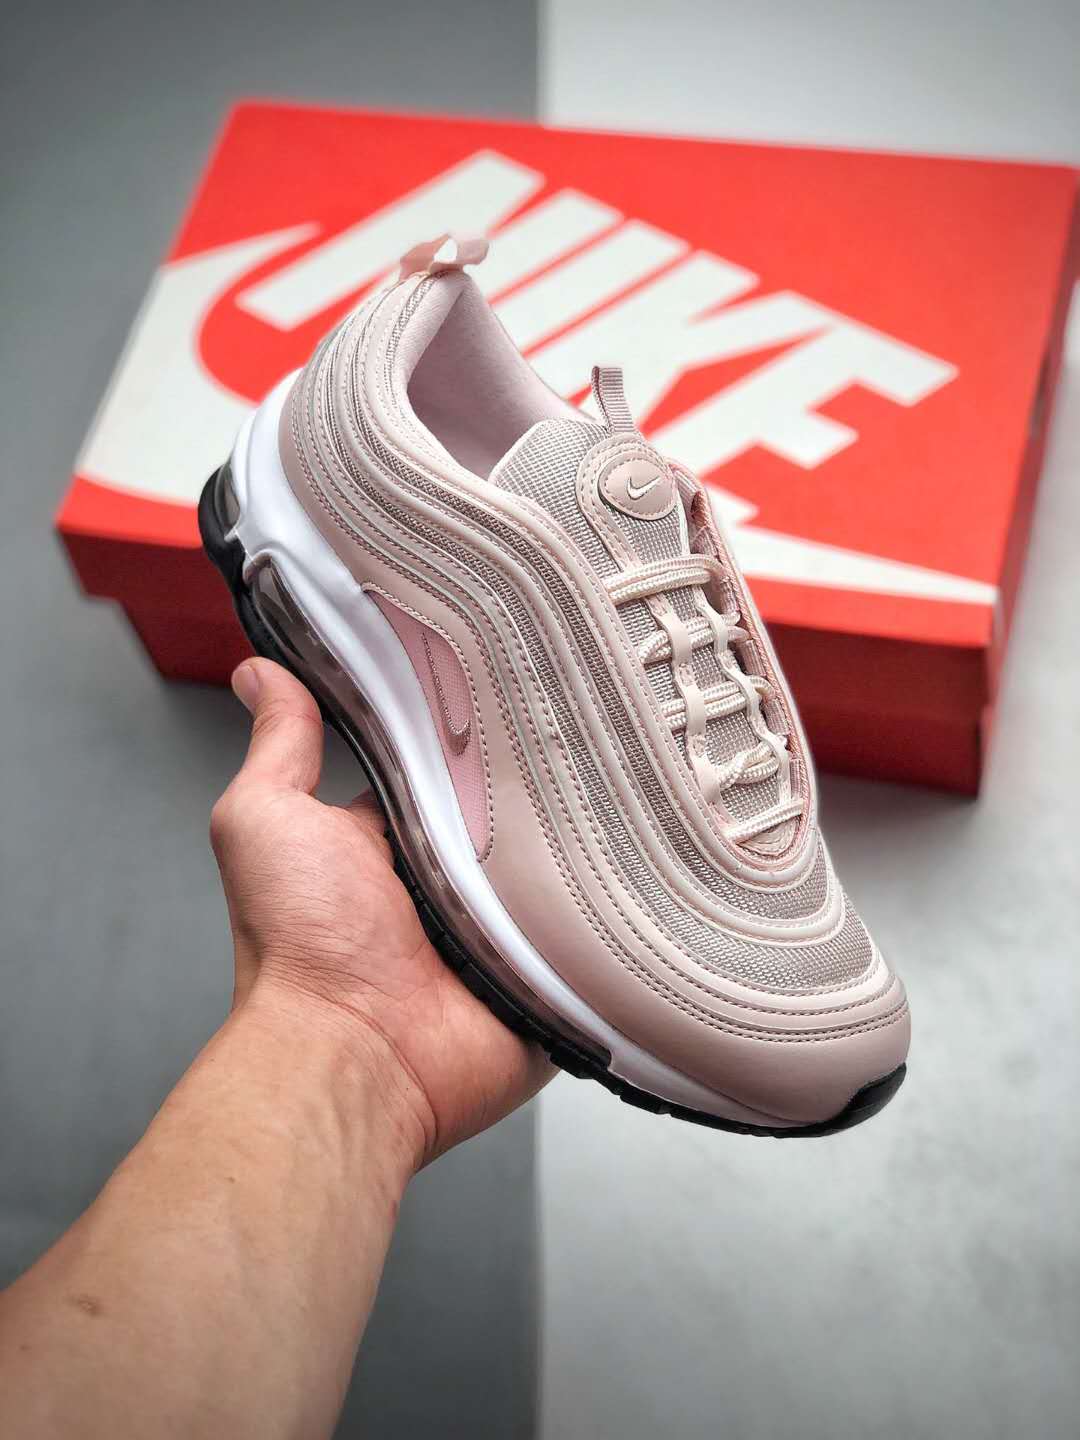 Nike Air Max 97 Ultra 'Cloud Plush' 921733-600 - Limited Edition Comfortable Sneakers